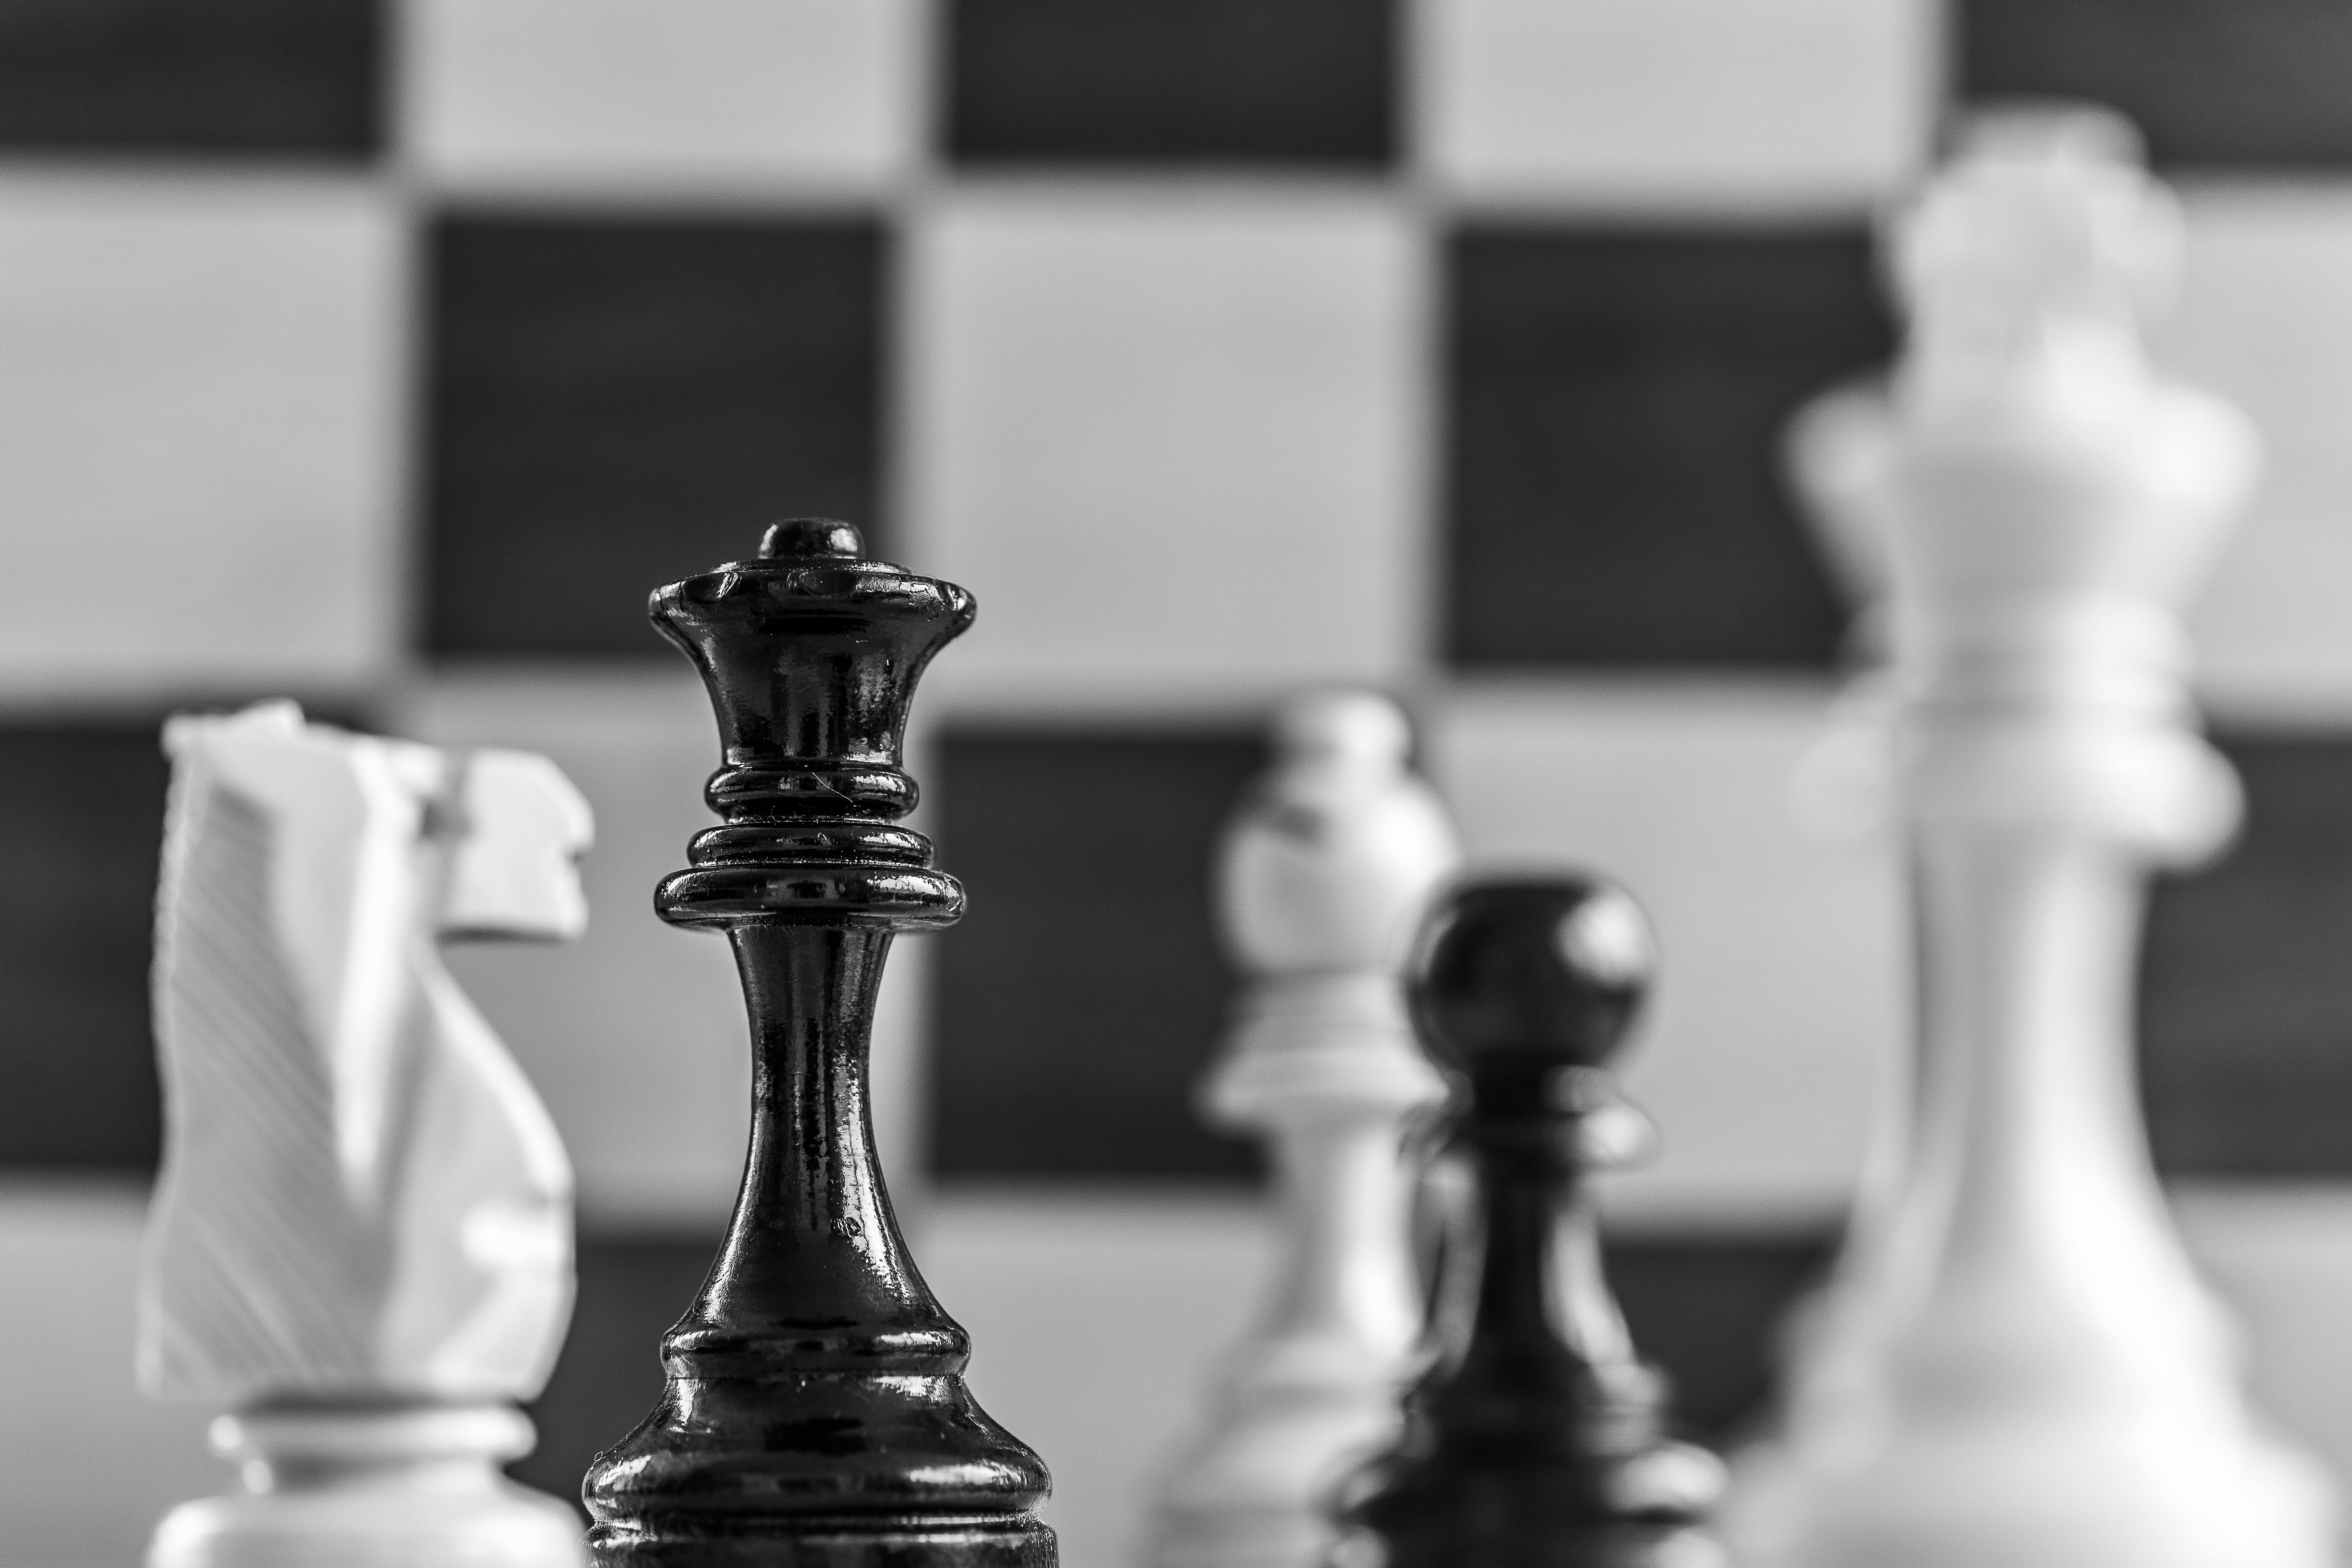 black and white chess photo - Google Search